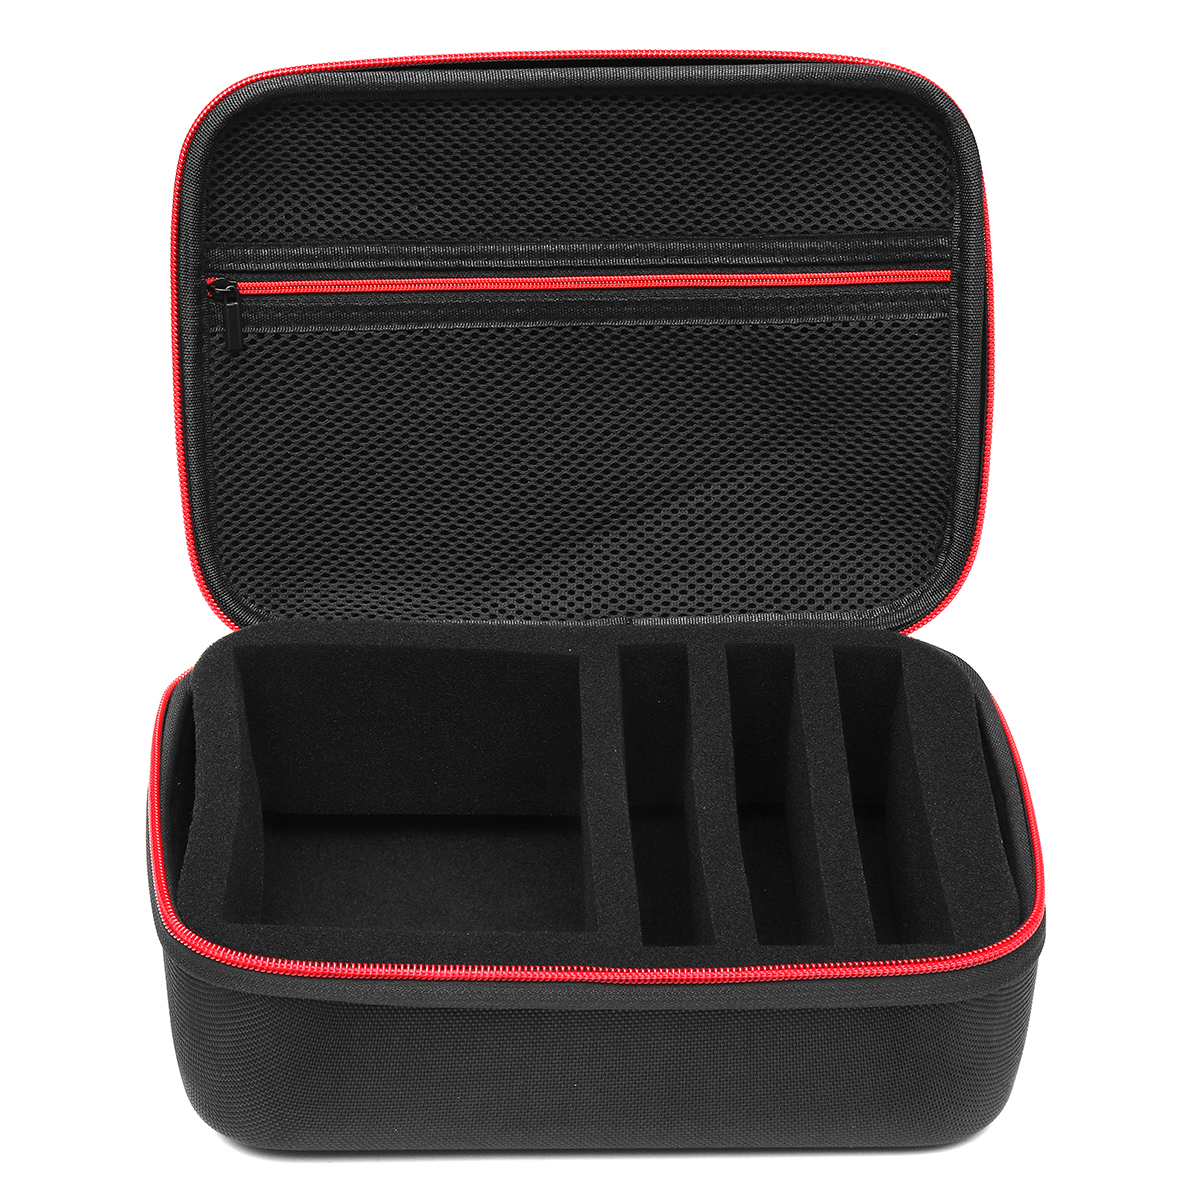 Portable Travel Storage Box Carry Case Bag For Nintendo Switch MINI SFC Game Console 13